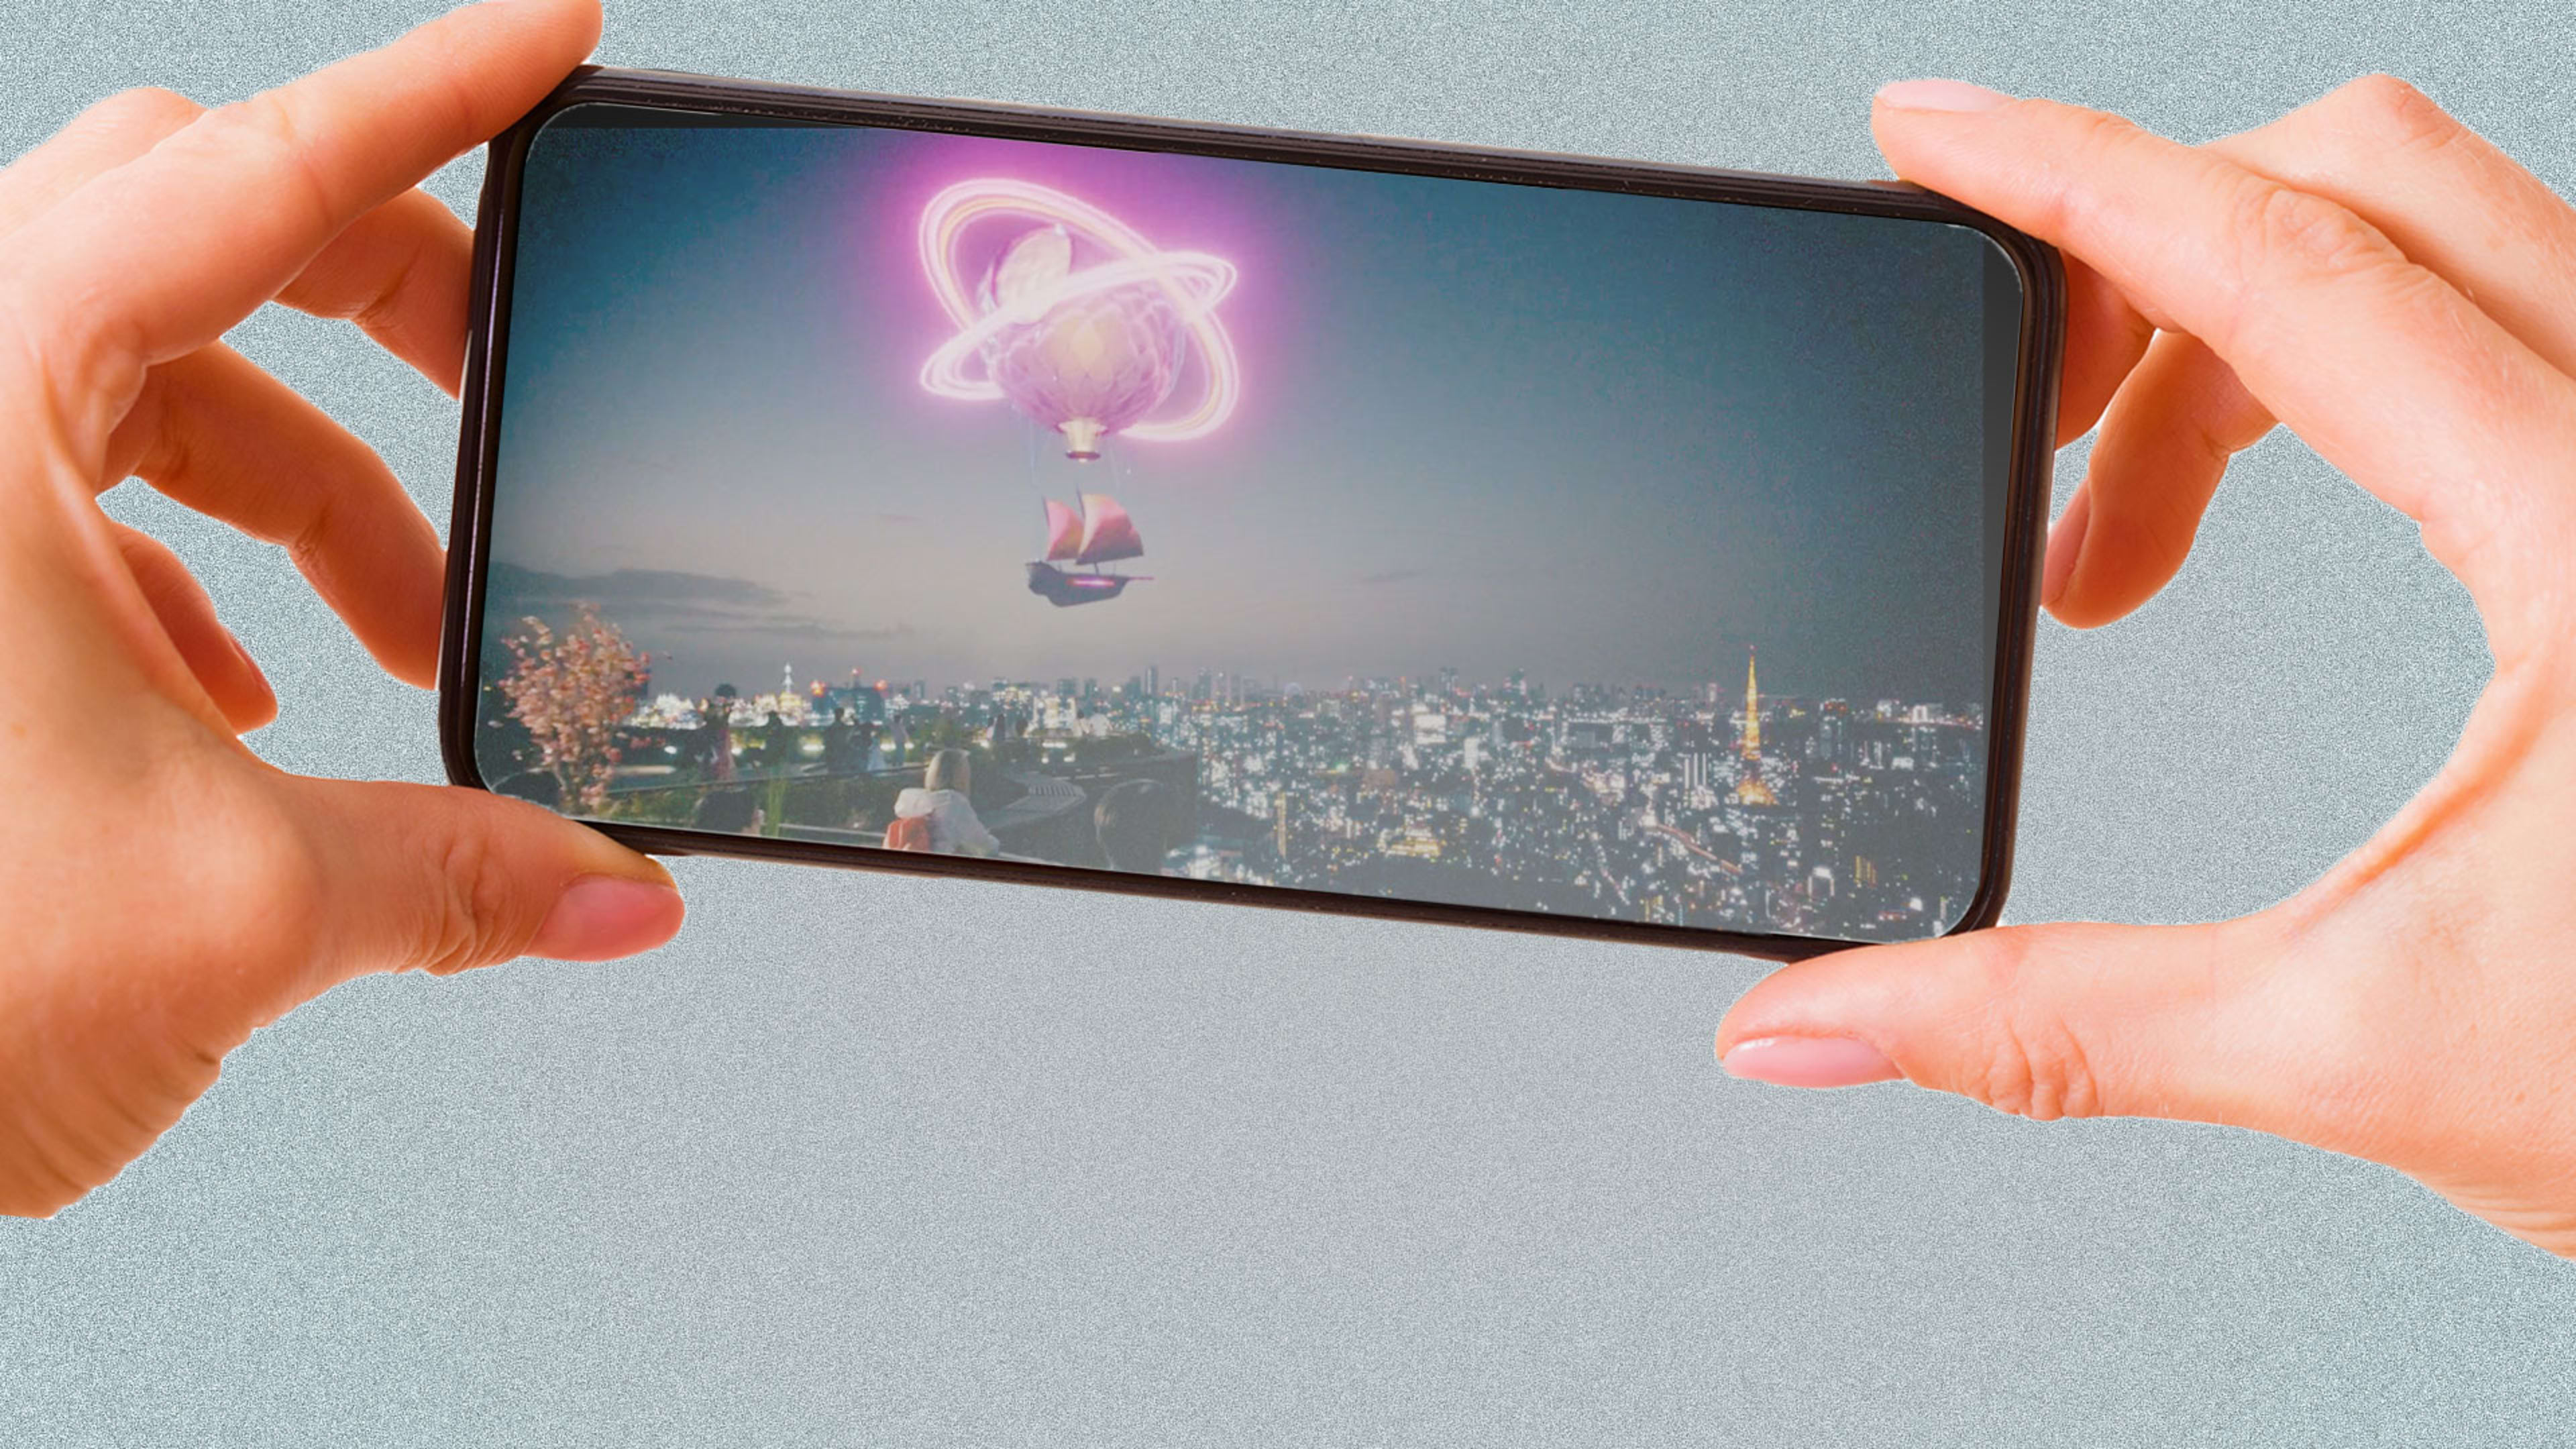 The maker of ‘Pokémon Go’ says the metaverse should take you outside